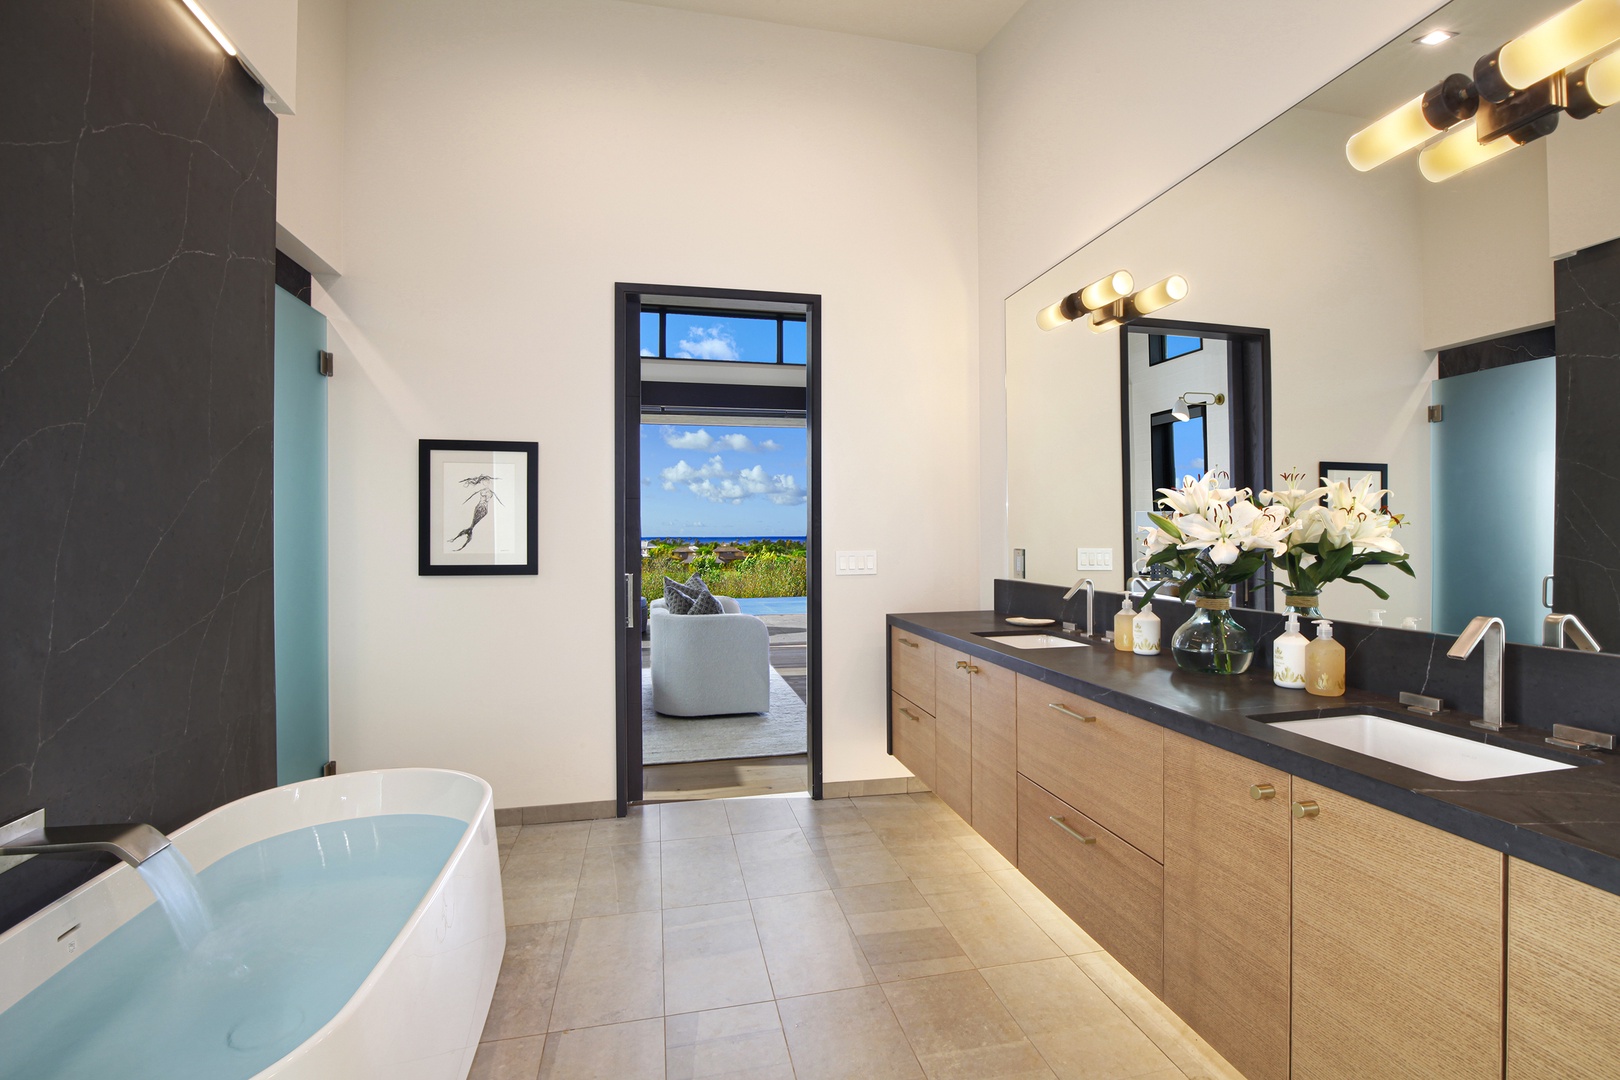 Koloa Vacation Rentals, Hale Mahina Hou - Relax and unwind in luxury with this stunning ensuite bathroom featuring a hot tub and shower.